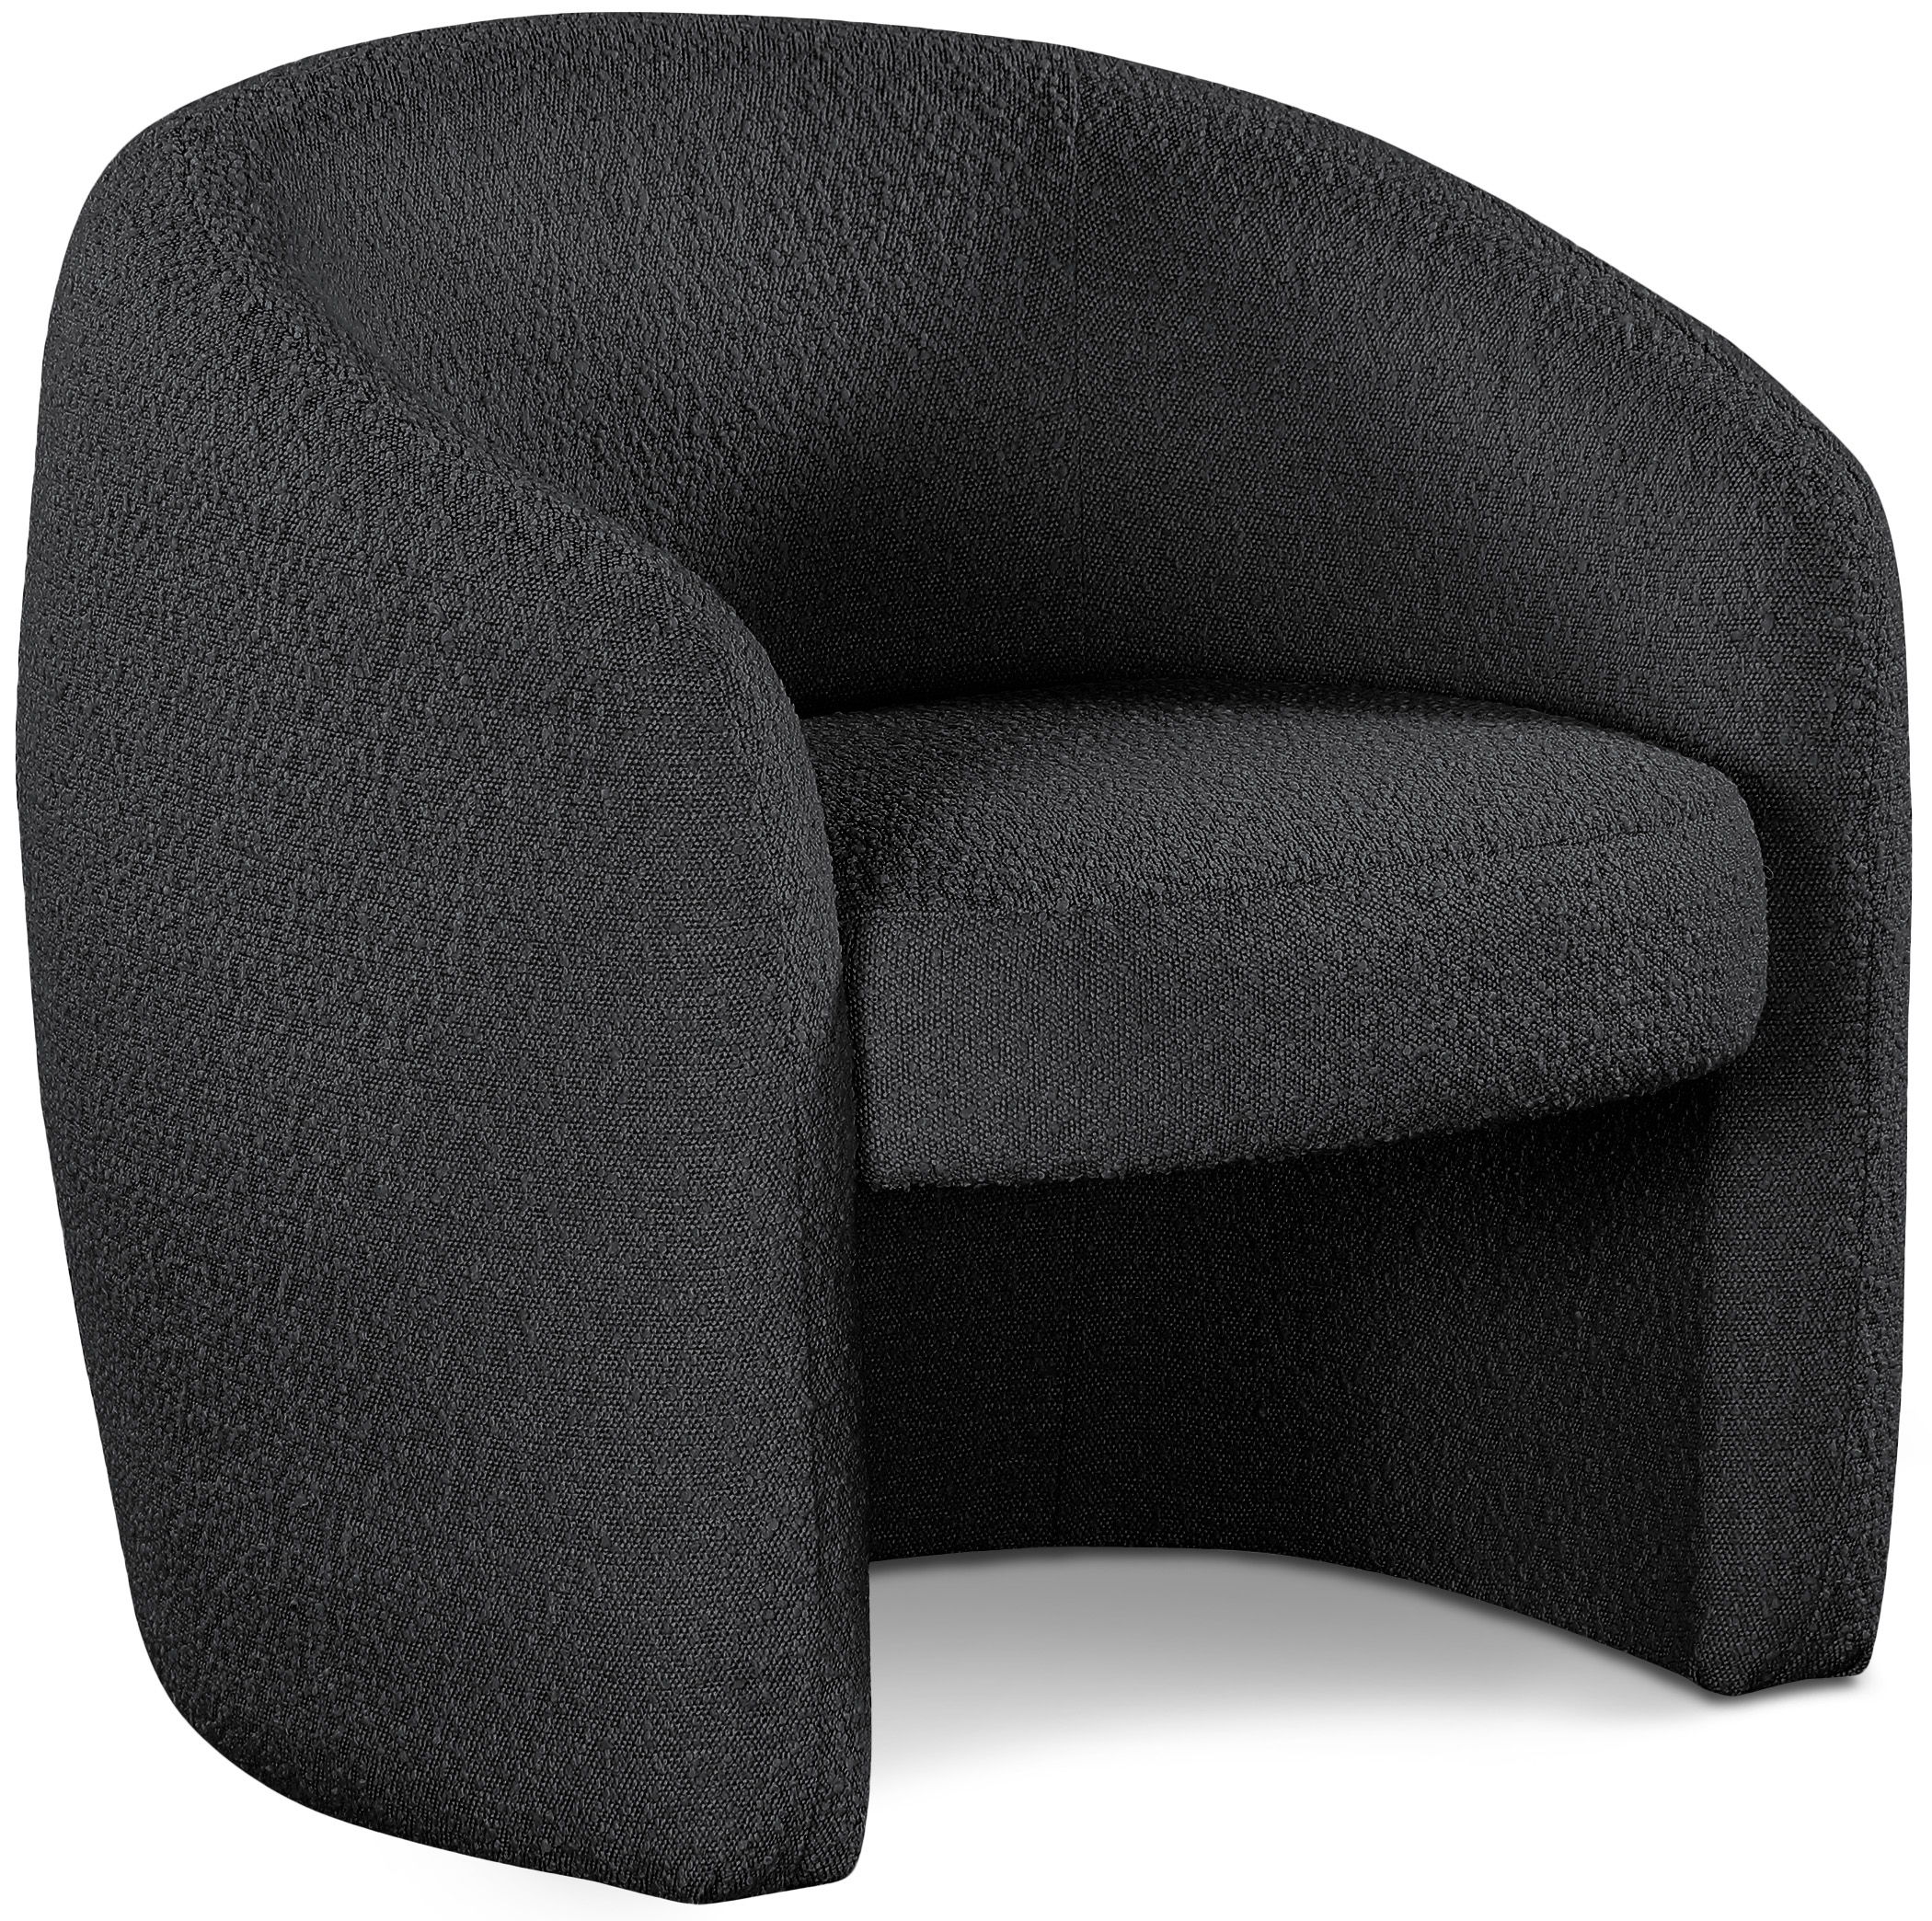 Acadia - Accent Chair - Black